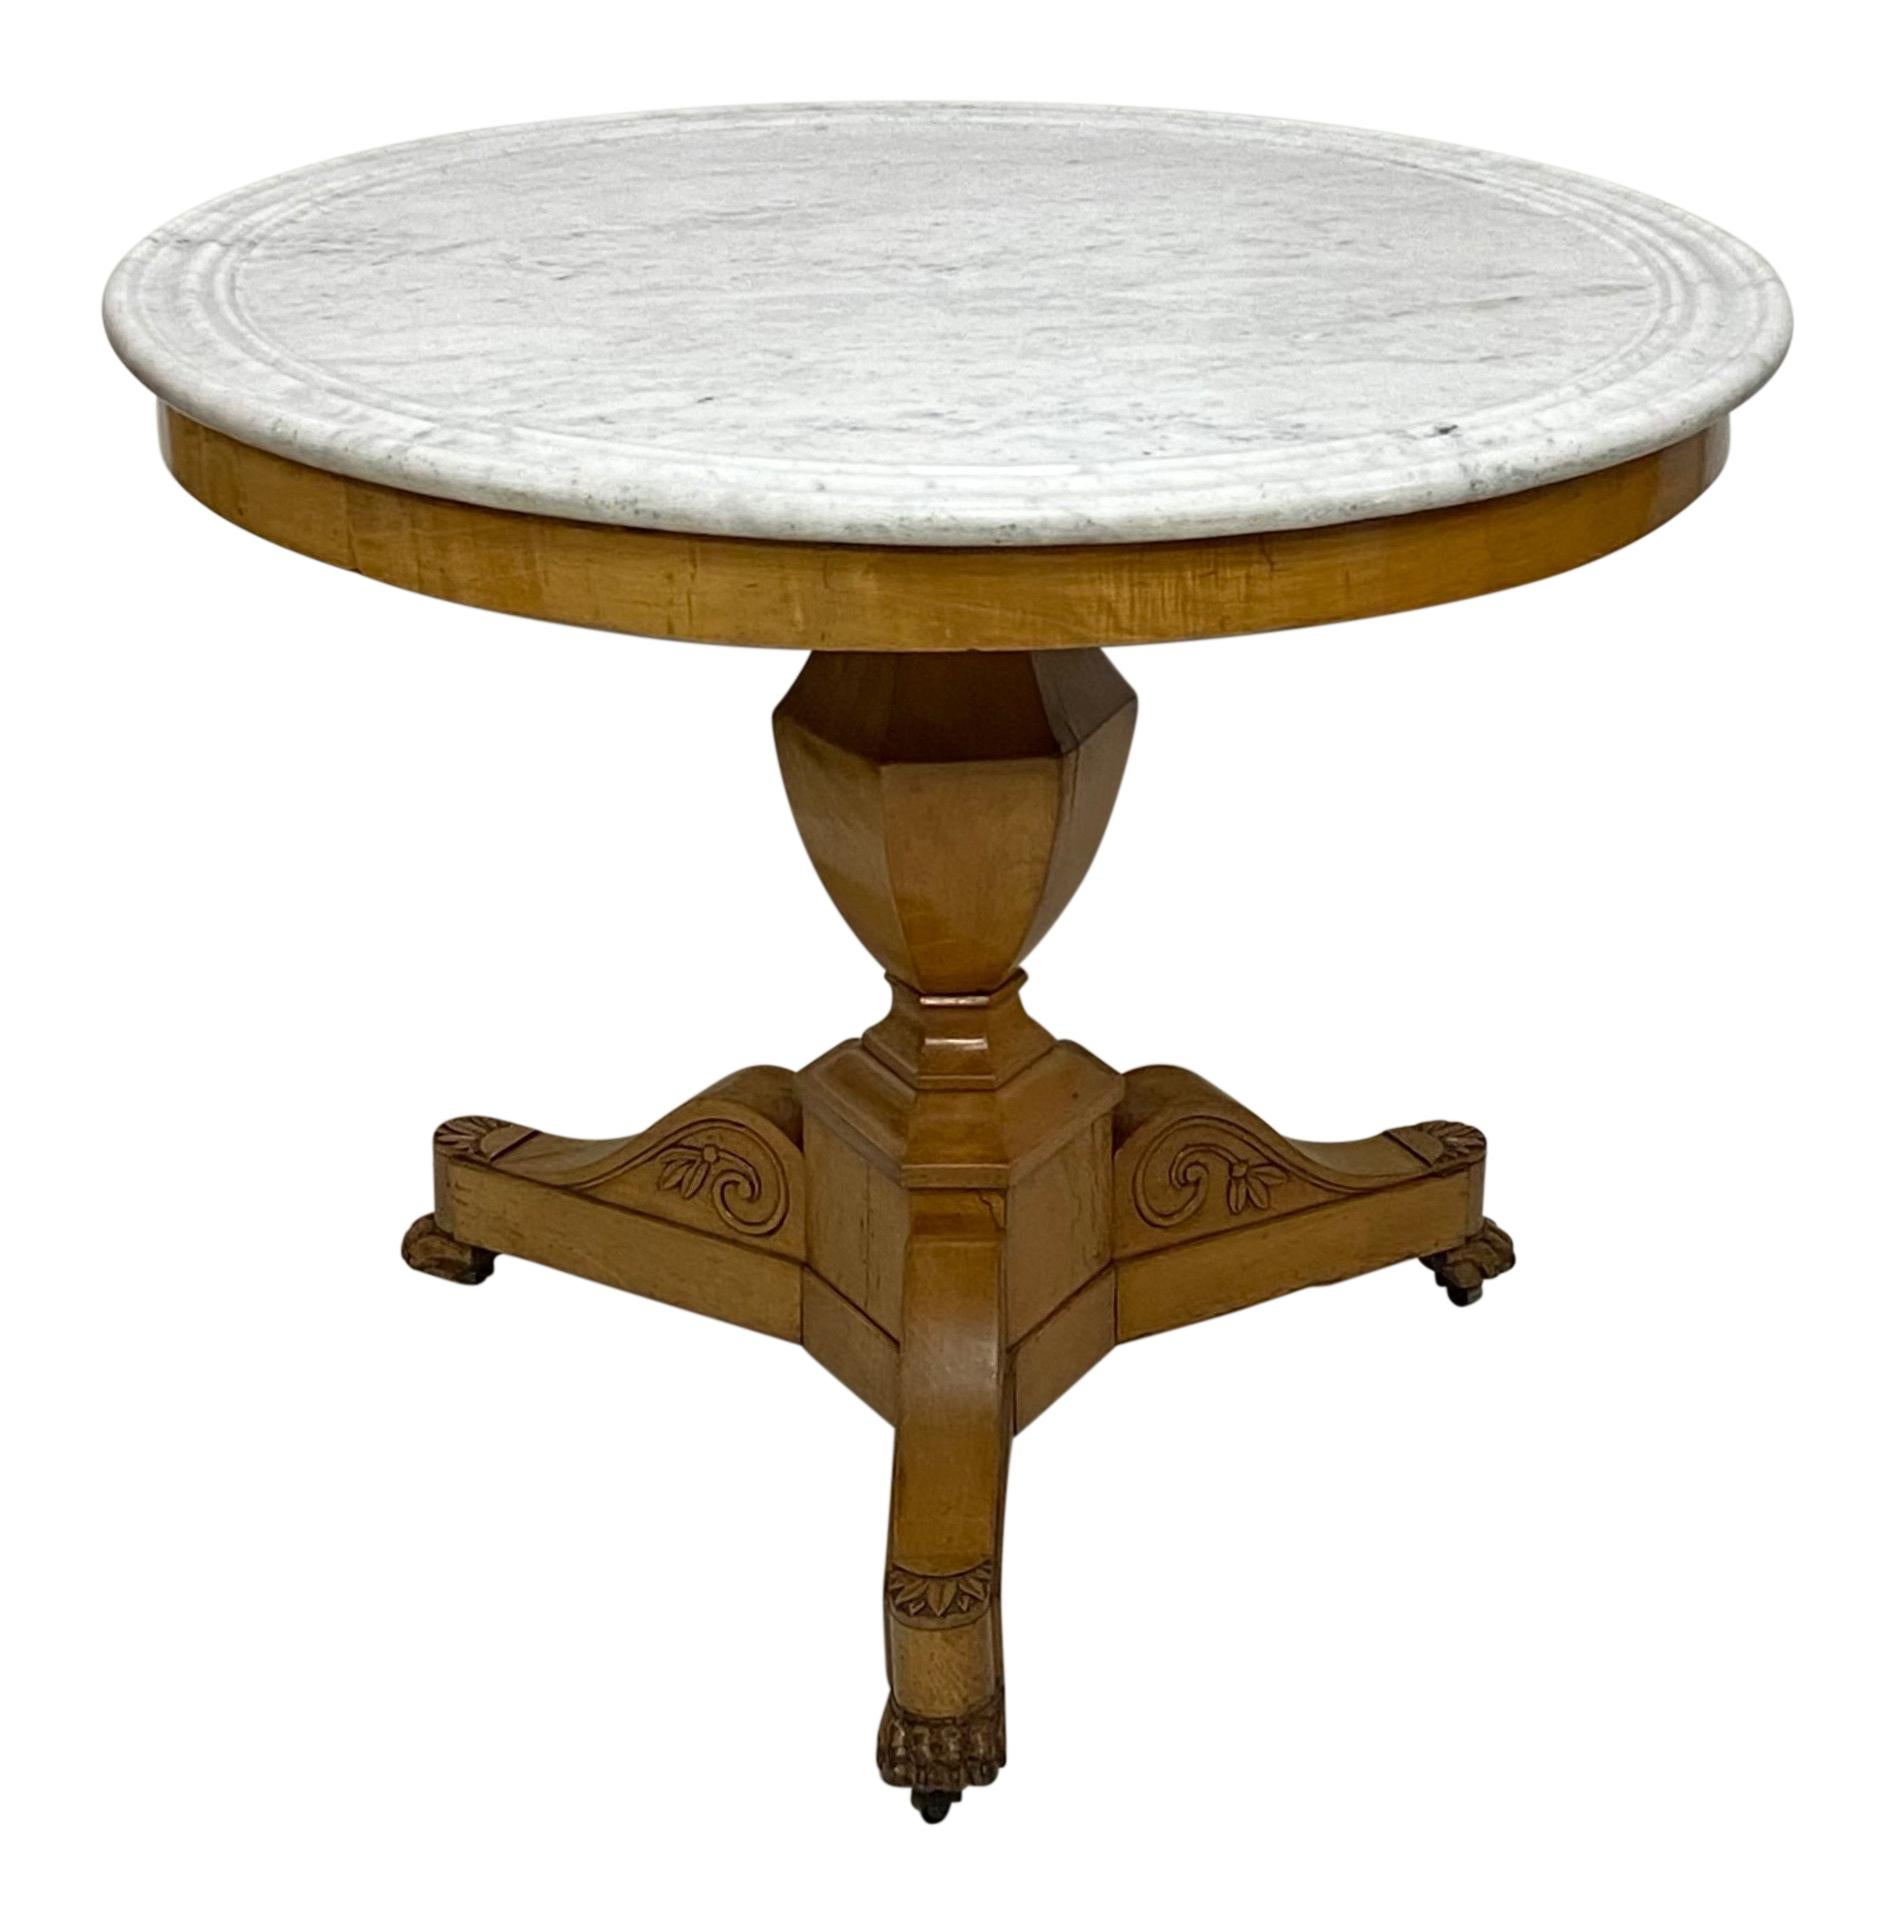 A high quality crafted Biedermeier style round maple center table with white marble top.
Original finish and marble, in lovely original antique condition.
1st quarter 19th century.
Northern European
Table shows expected light crazing to the